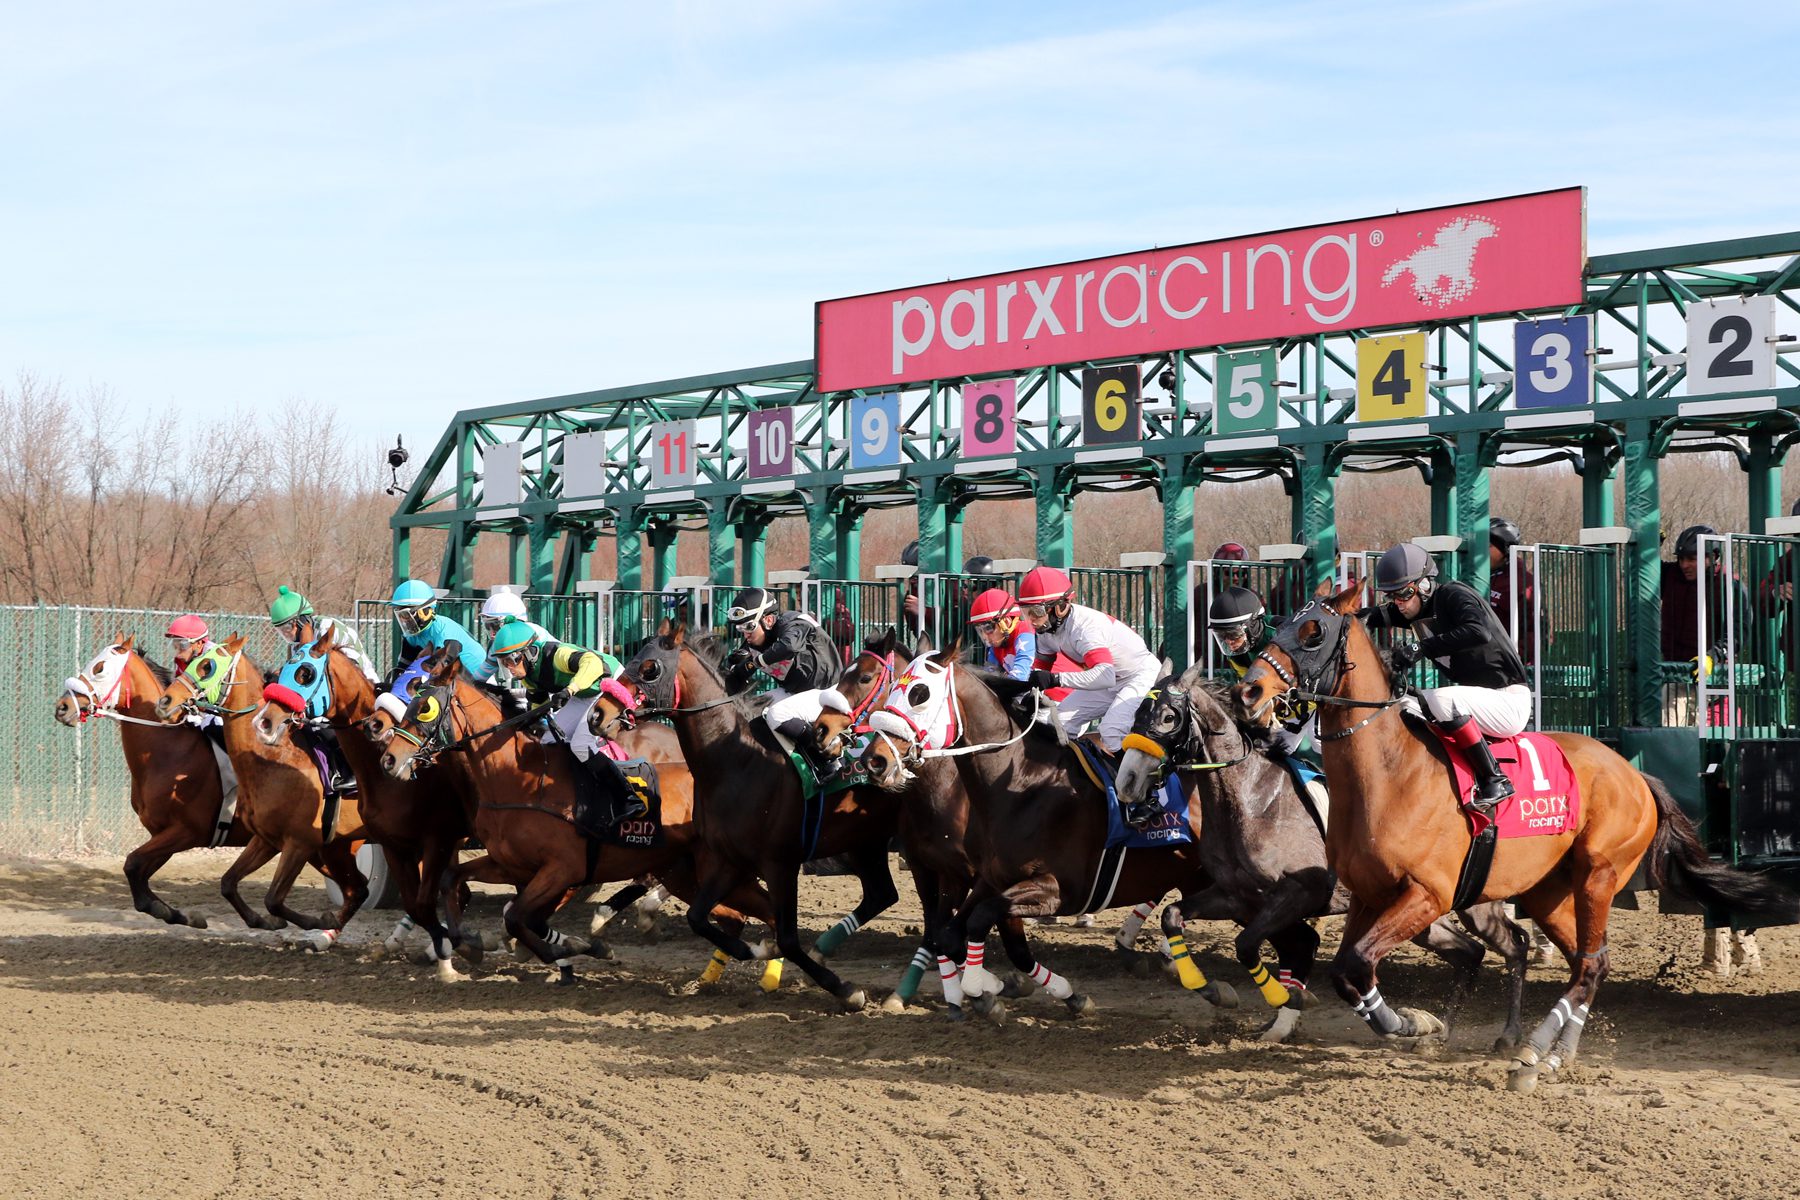 The start of Race 5 at Parx on March 8, 2022. Photo By: Chad B. Harmon